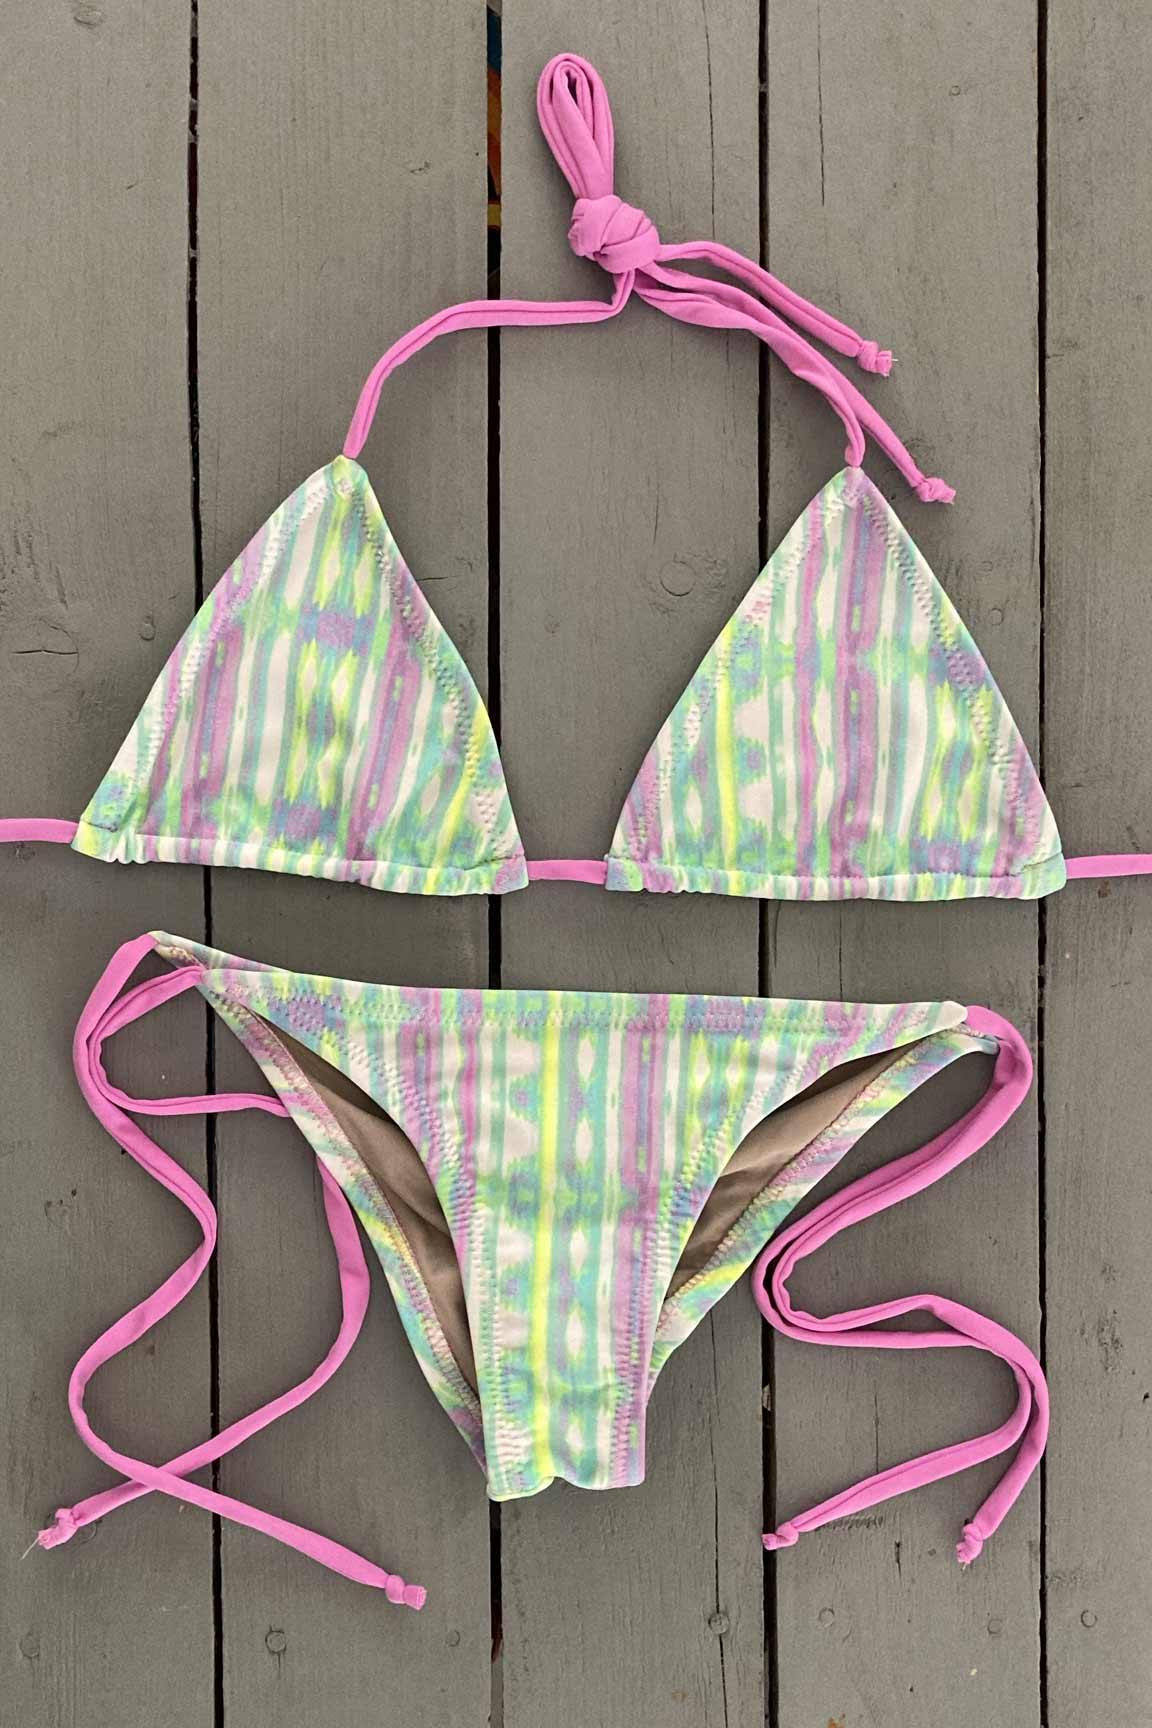 Splash around by the pool this summer in this super sexy lavender, spaghetti bikini bottom with scrunch. Made with the finest quality of soft and stretchy Lycra to achieve the best fit. Order yours today. @jillesbikinis